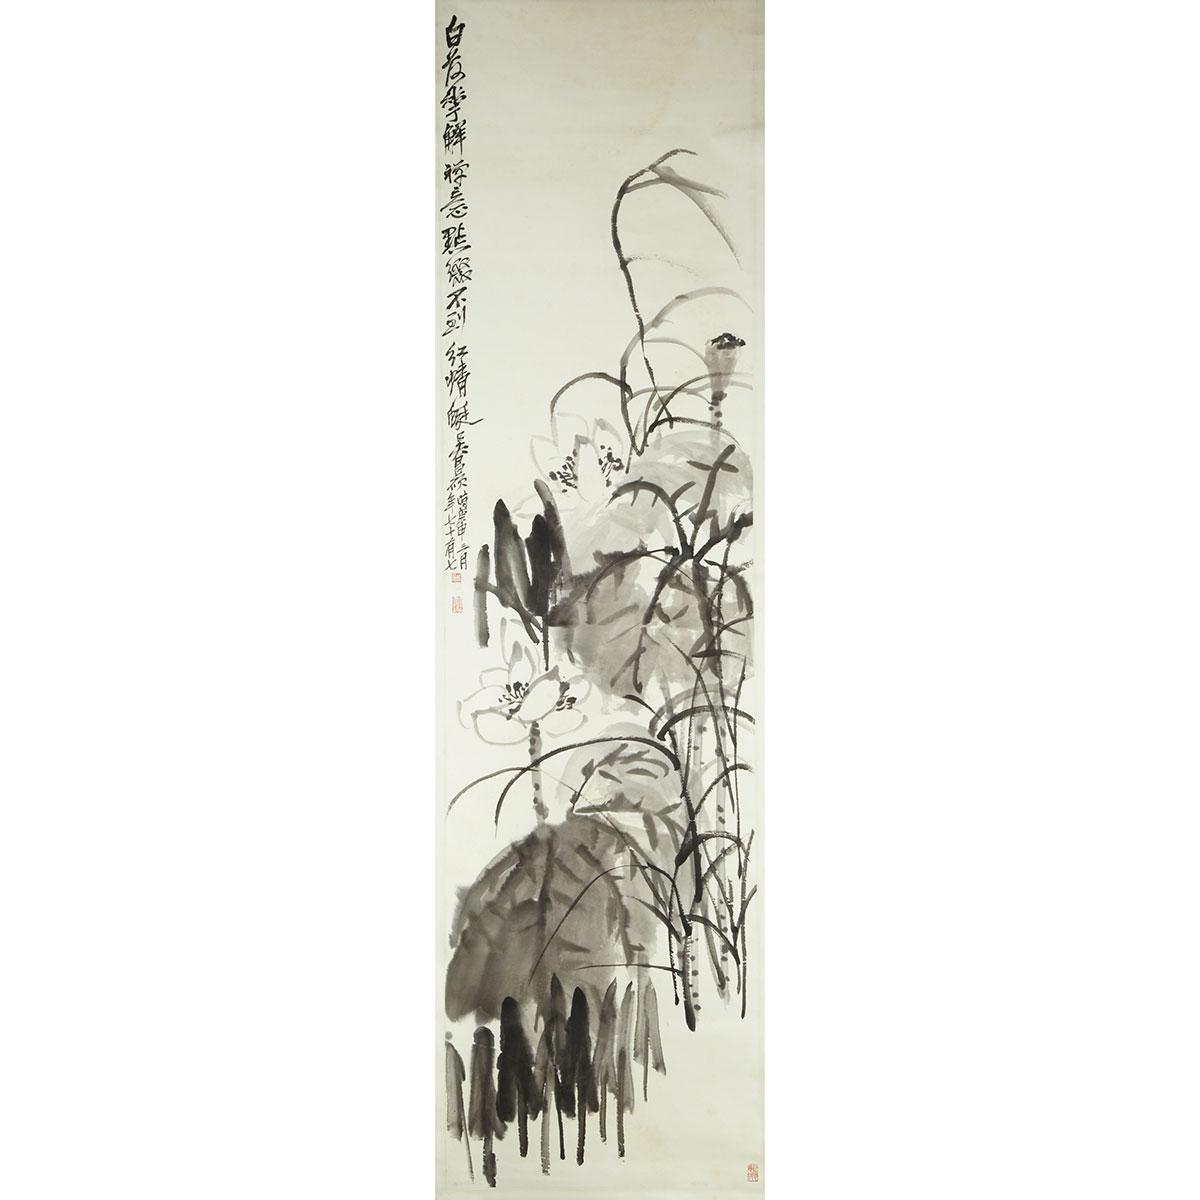 Attributed to Wu Changshuo (1844-1927)